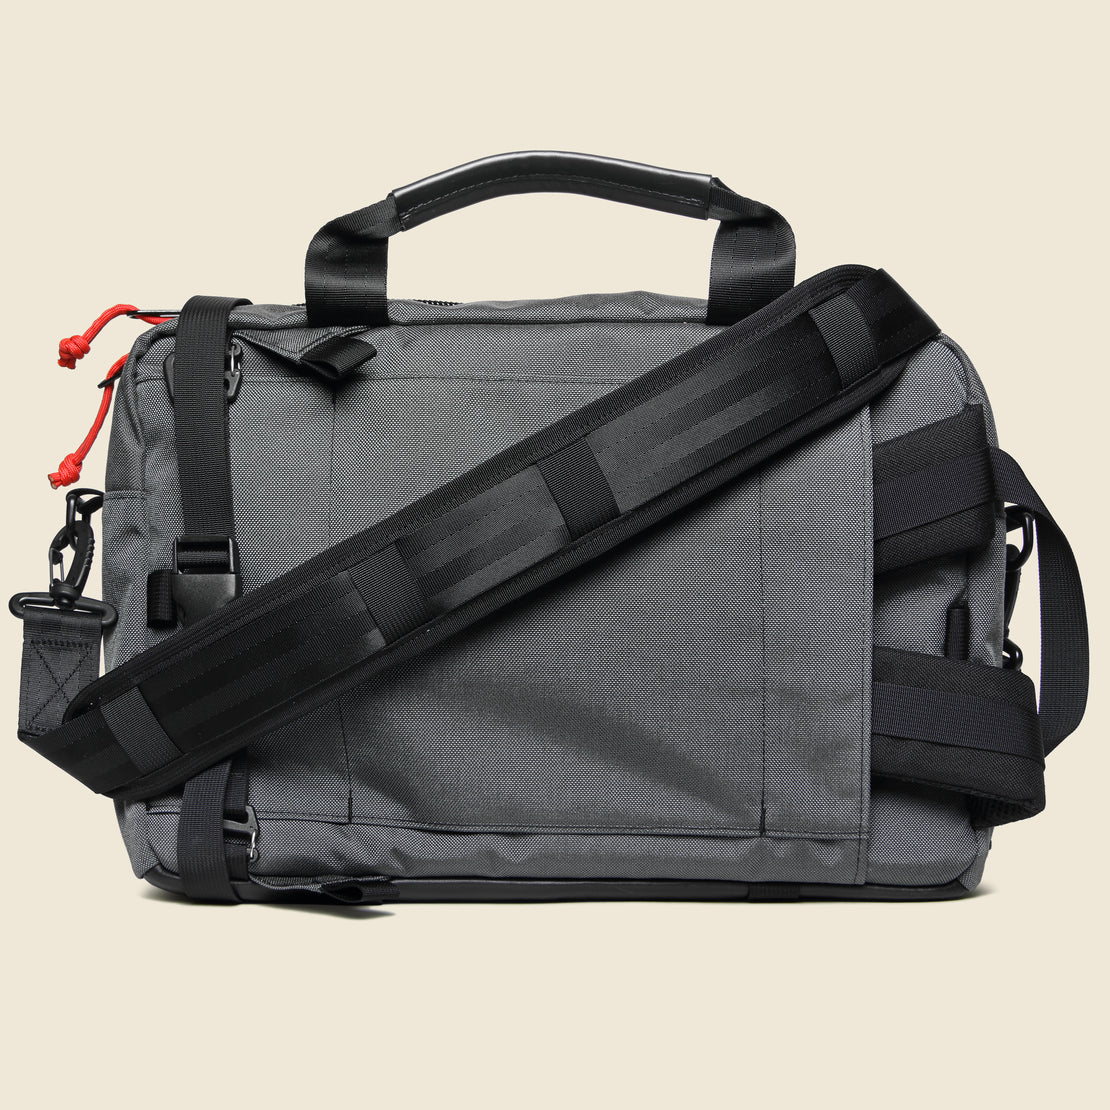 Commuter Briefcase - Charcoal/Black Leather - Topo Designs - STAG Provisions - Accessories - Bags / Luggage